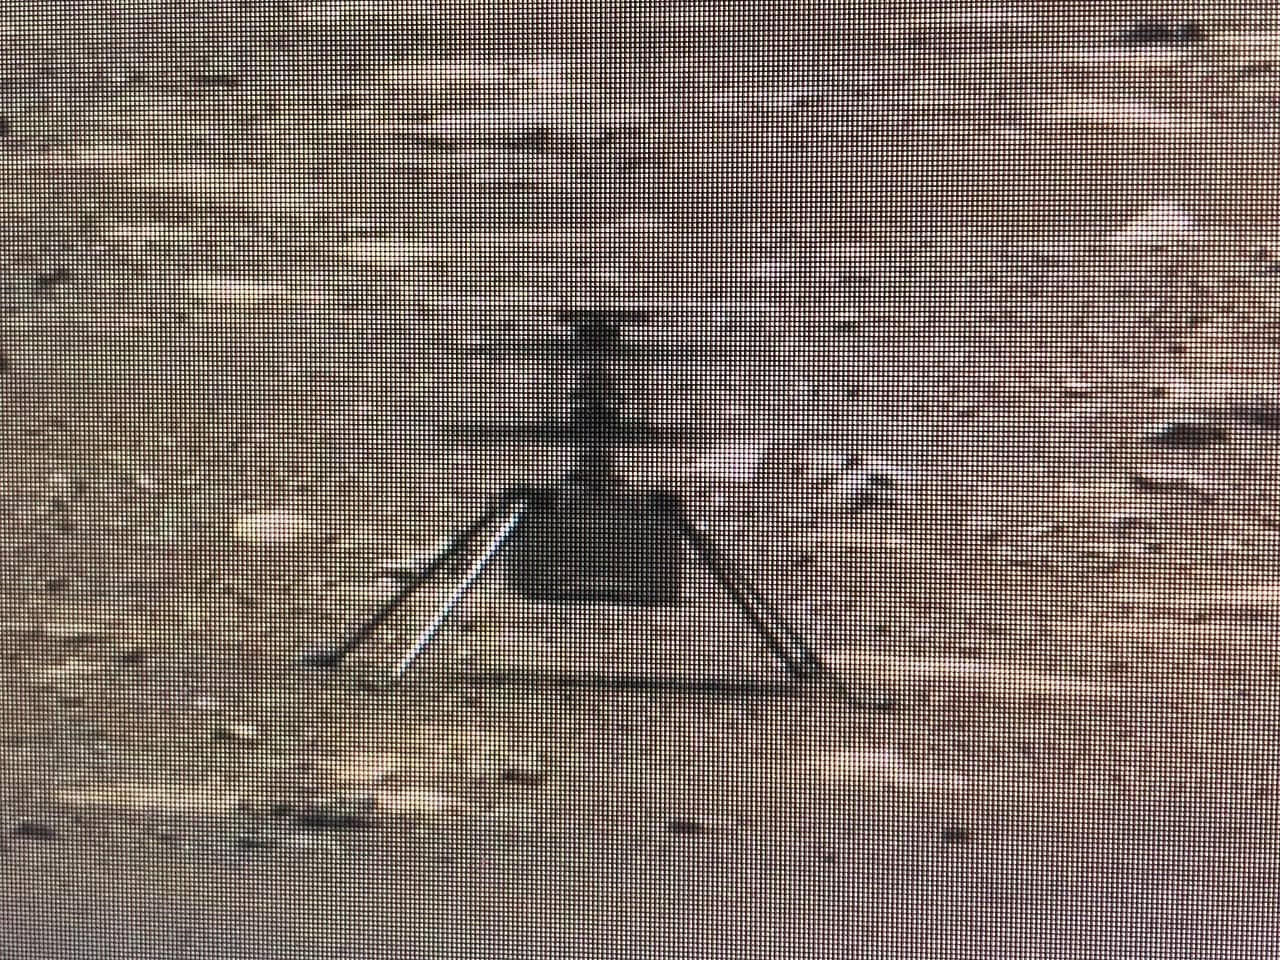 Mars helicopter on Earth